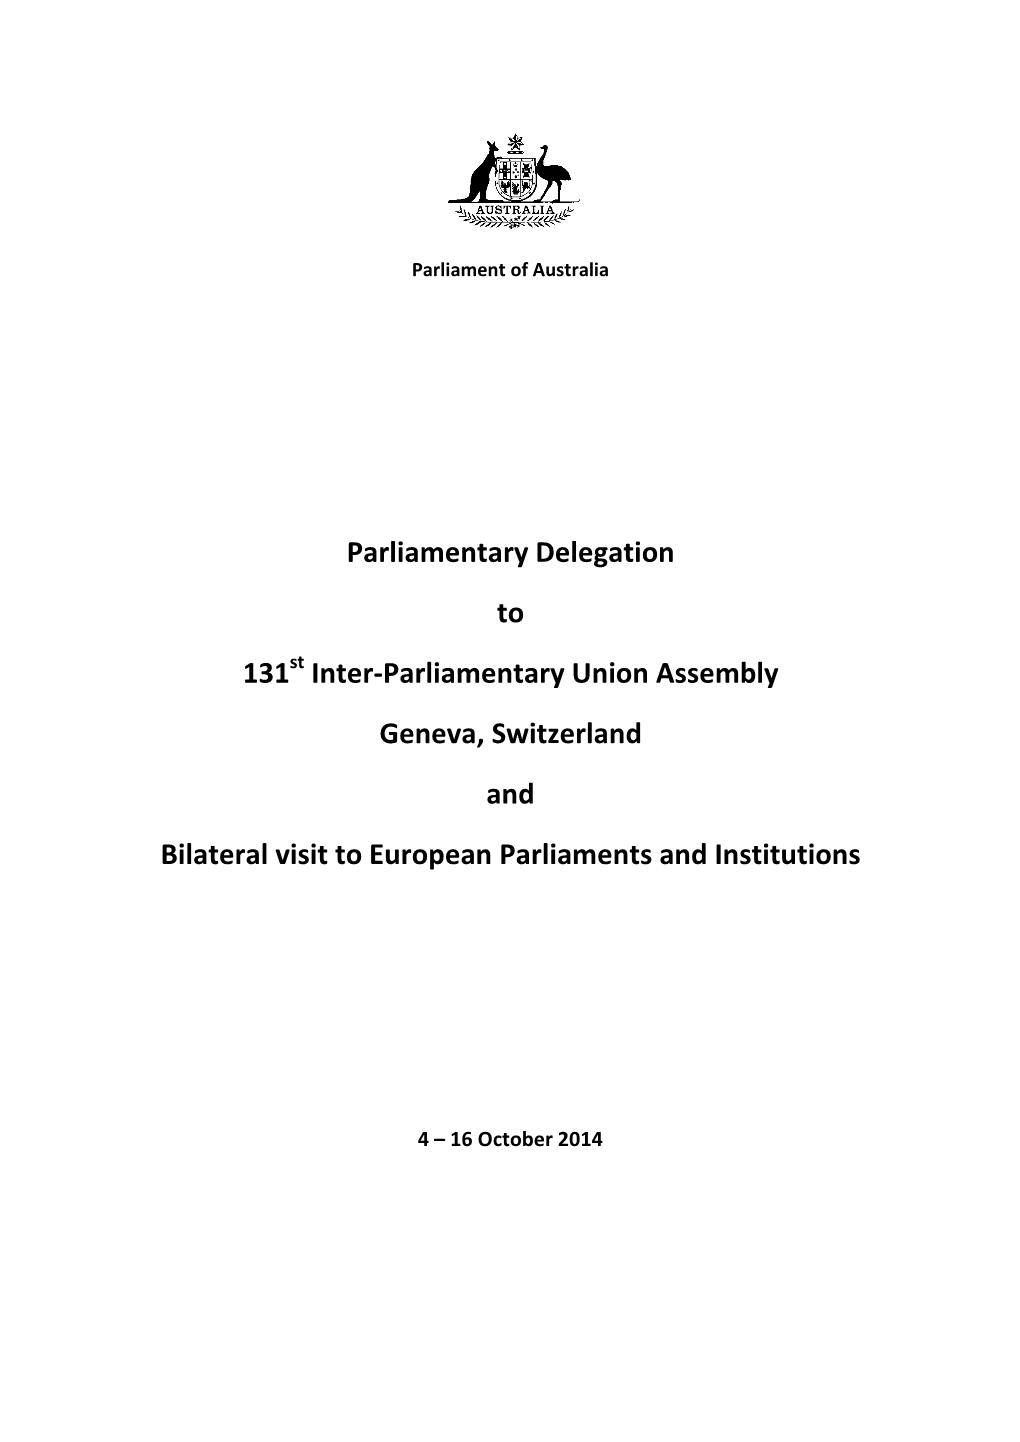 Inter-Parliamentary Union Assembly Geneva, Switzerland and Bilateral Visit to European Parliaments and Institutions